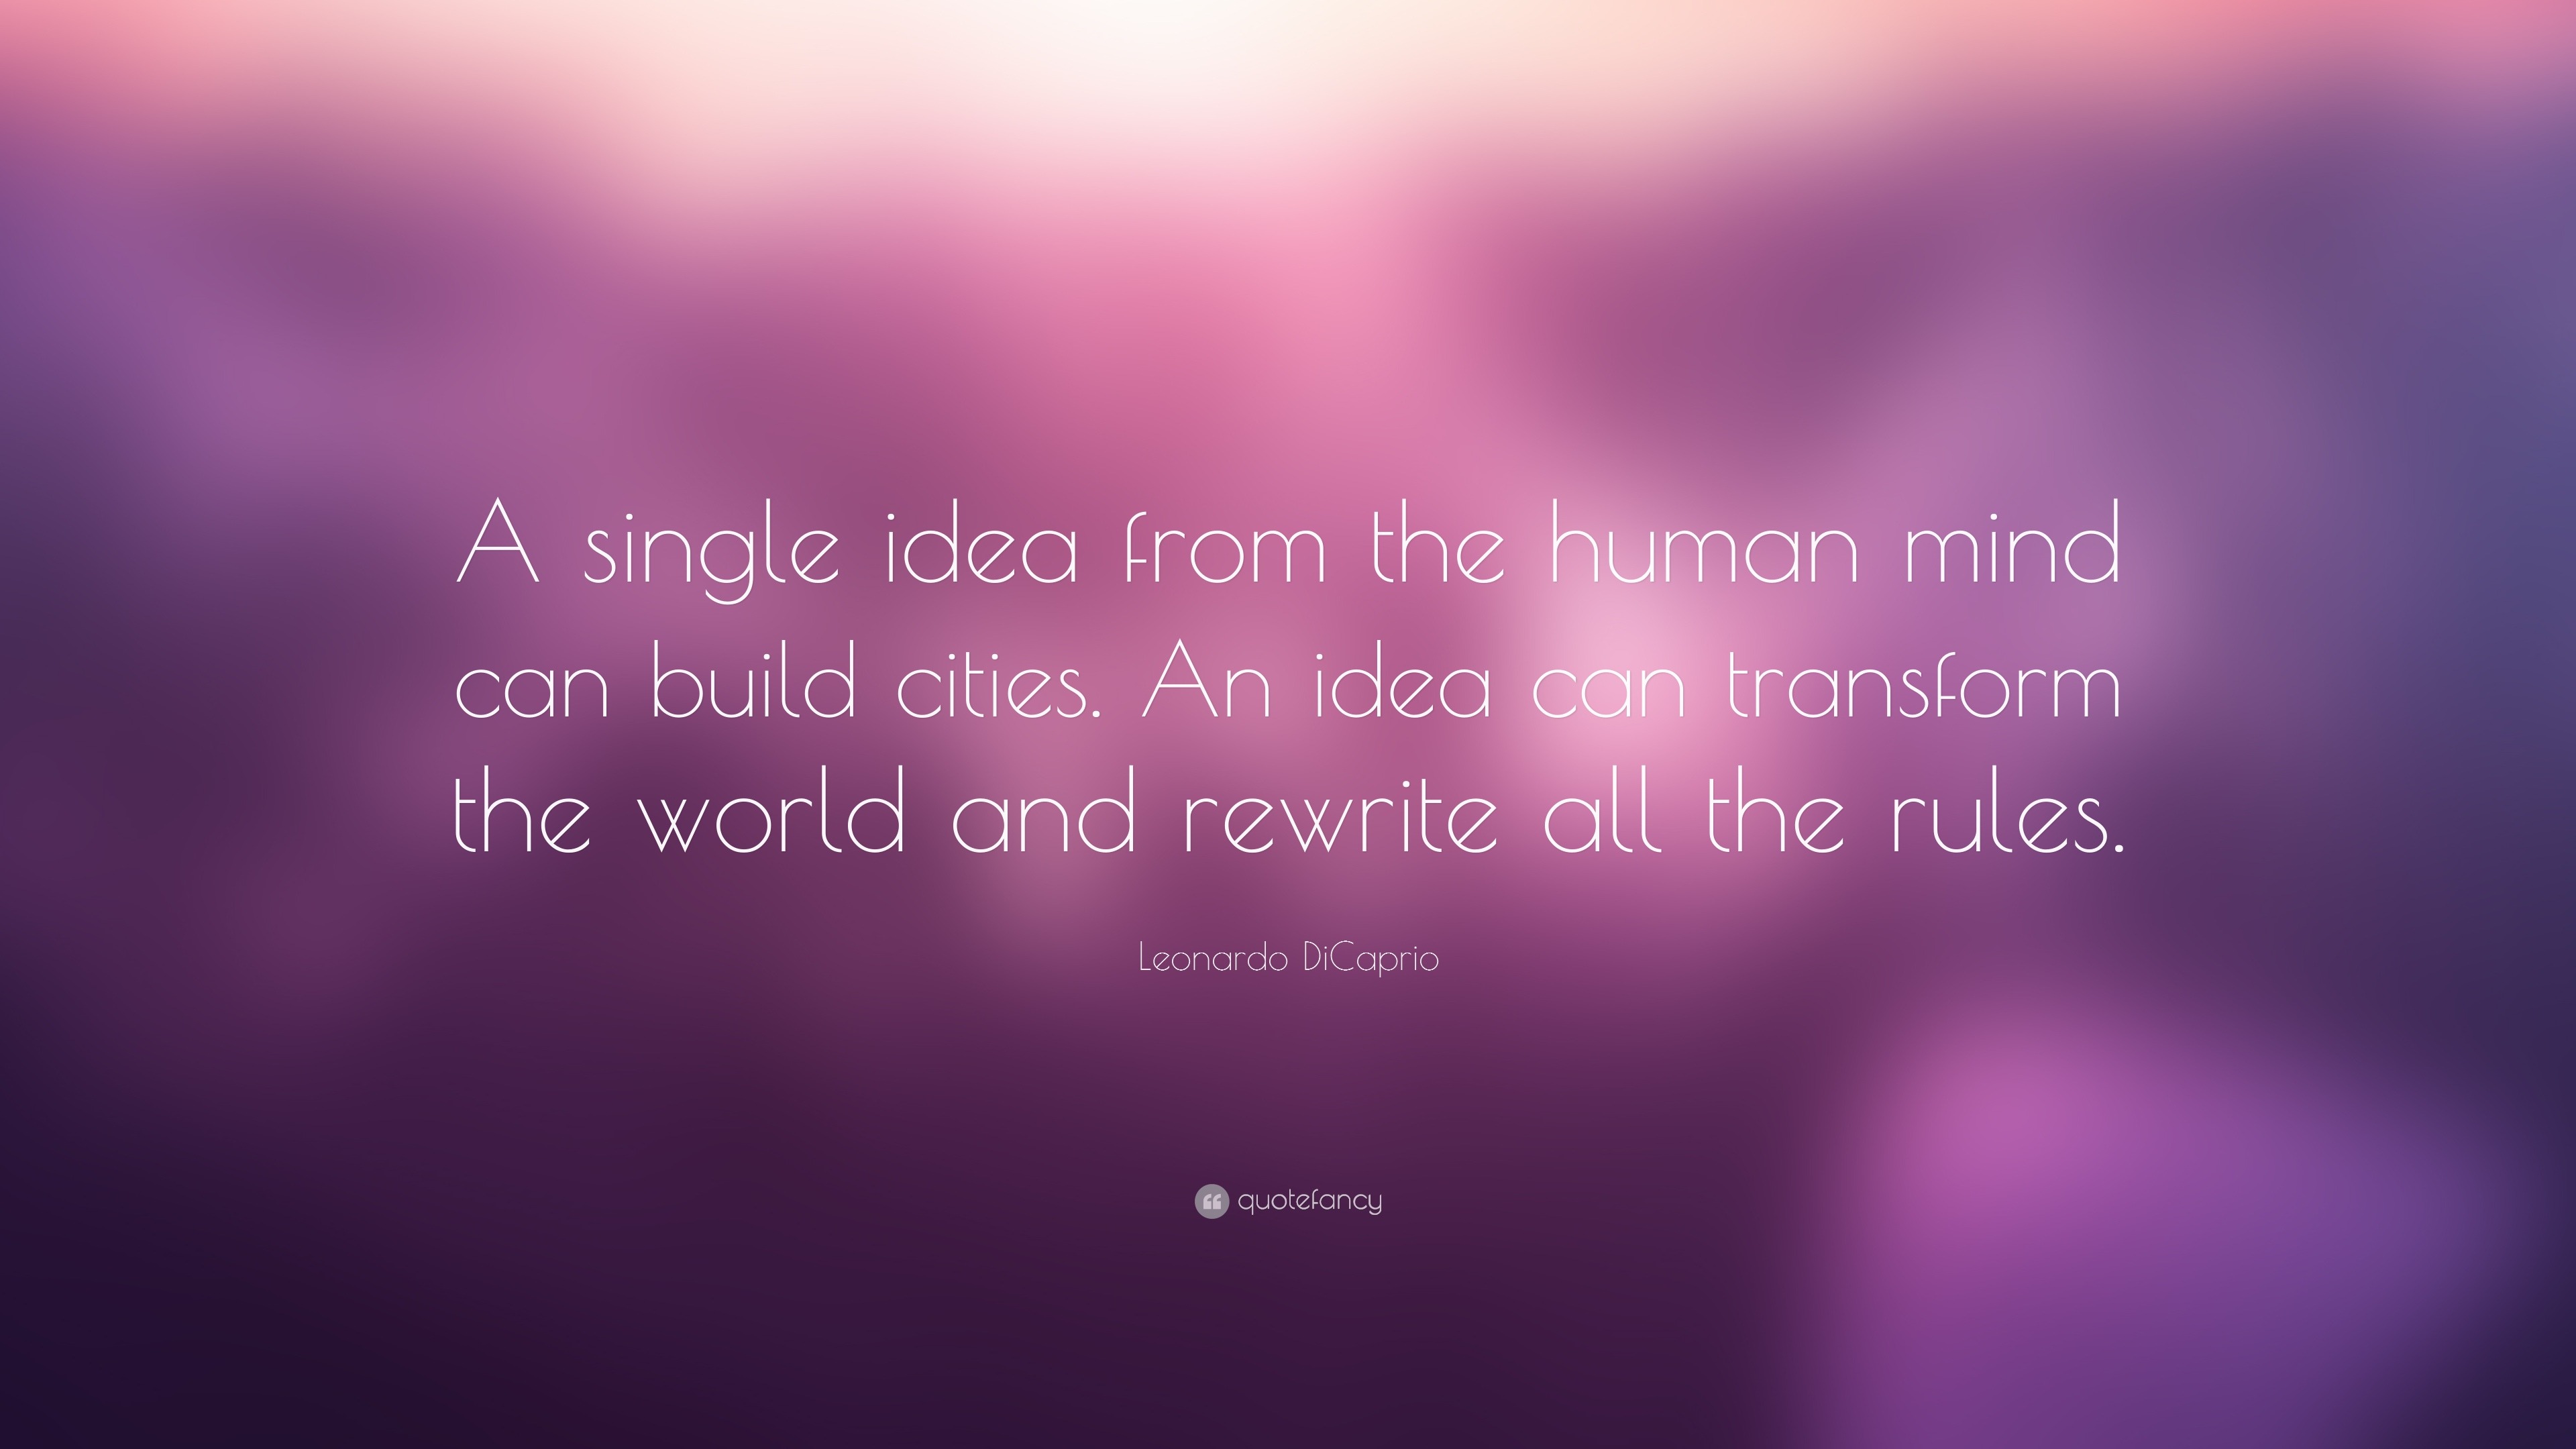 Leonardo DiCaprio Quote: “A single idea from the human mind can build ...